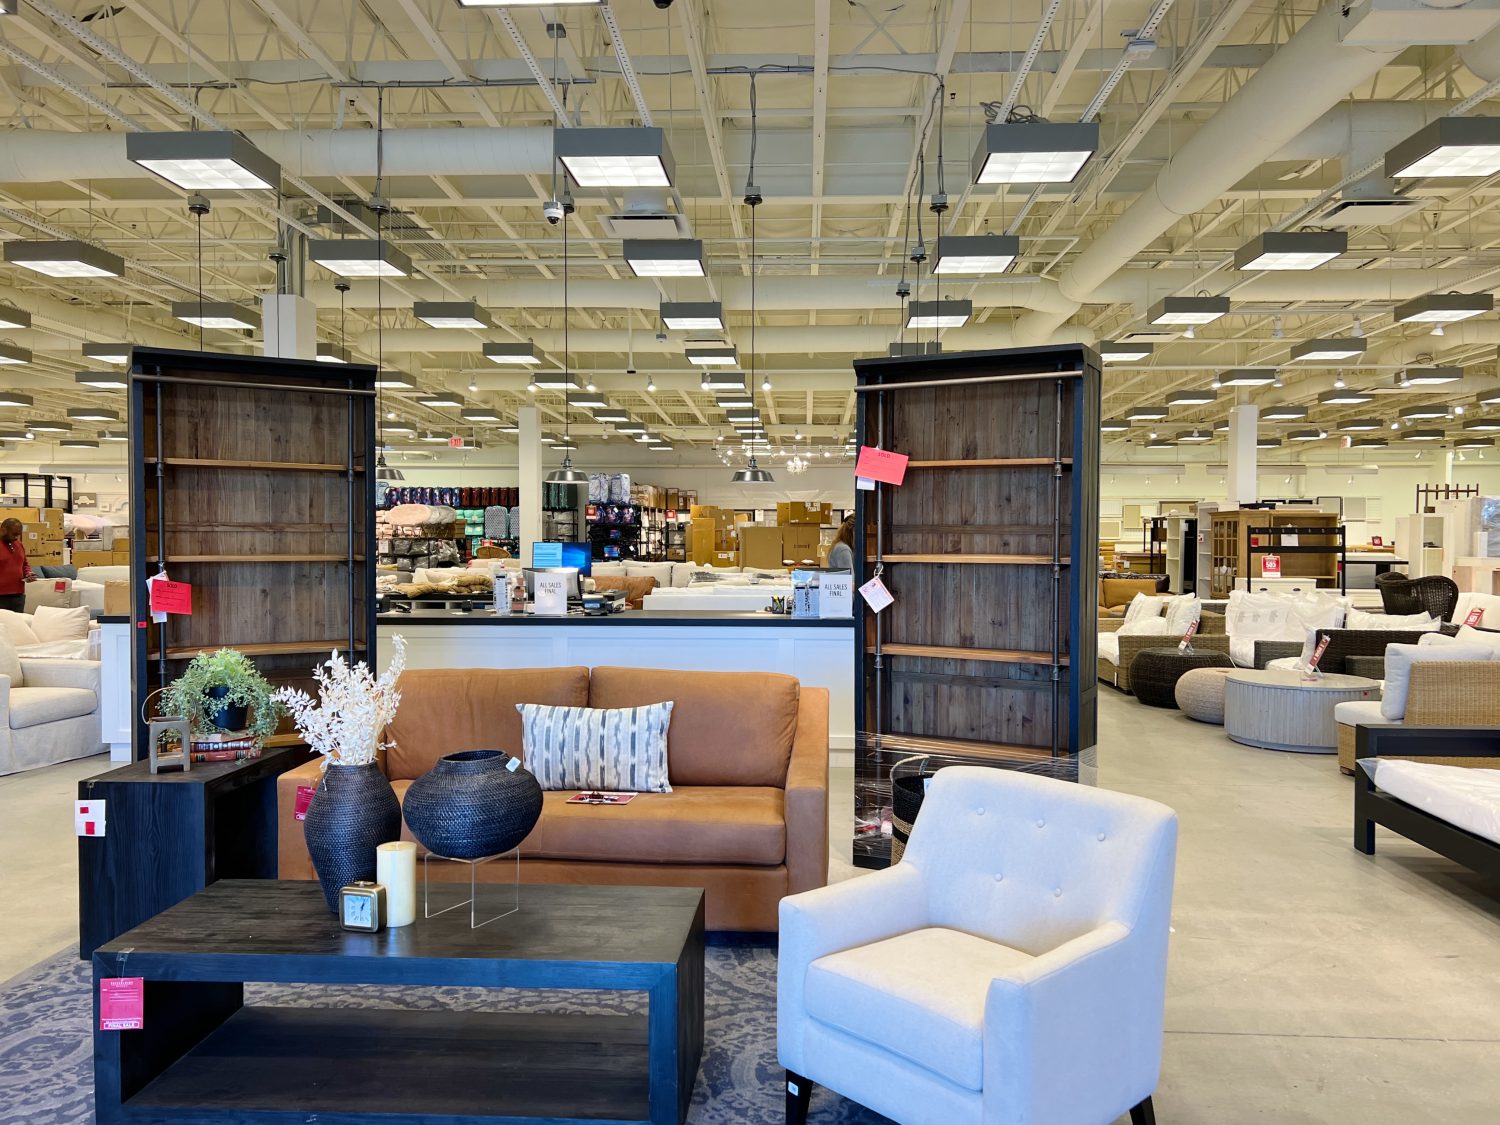 Thrifty Shopper Pottery Barn Outlet Store